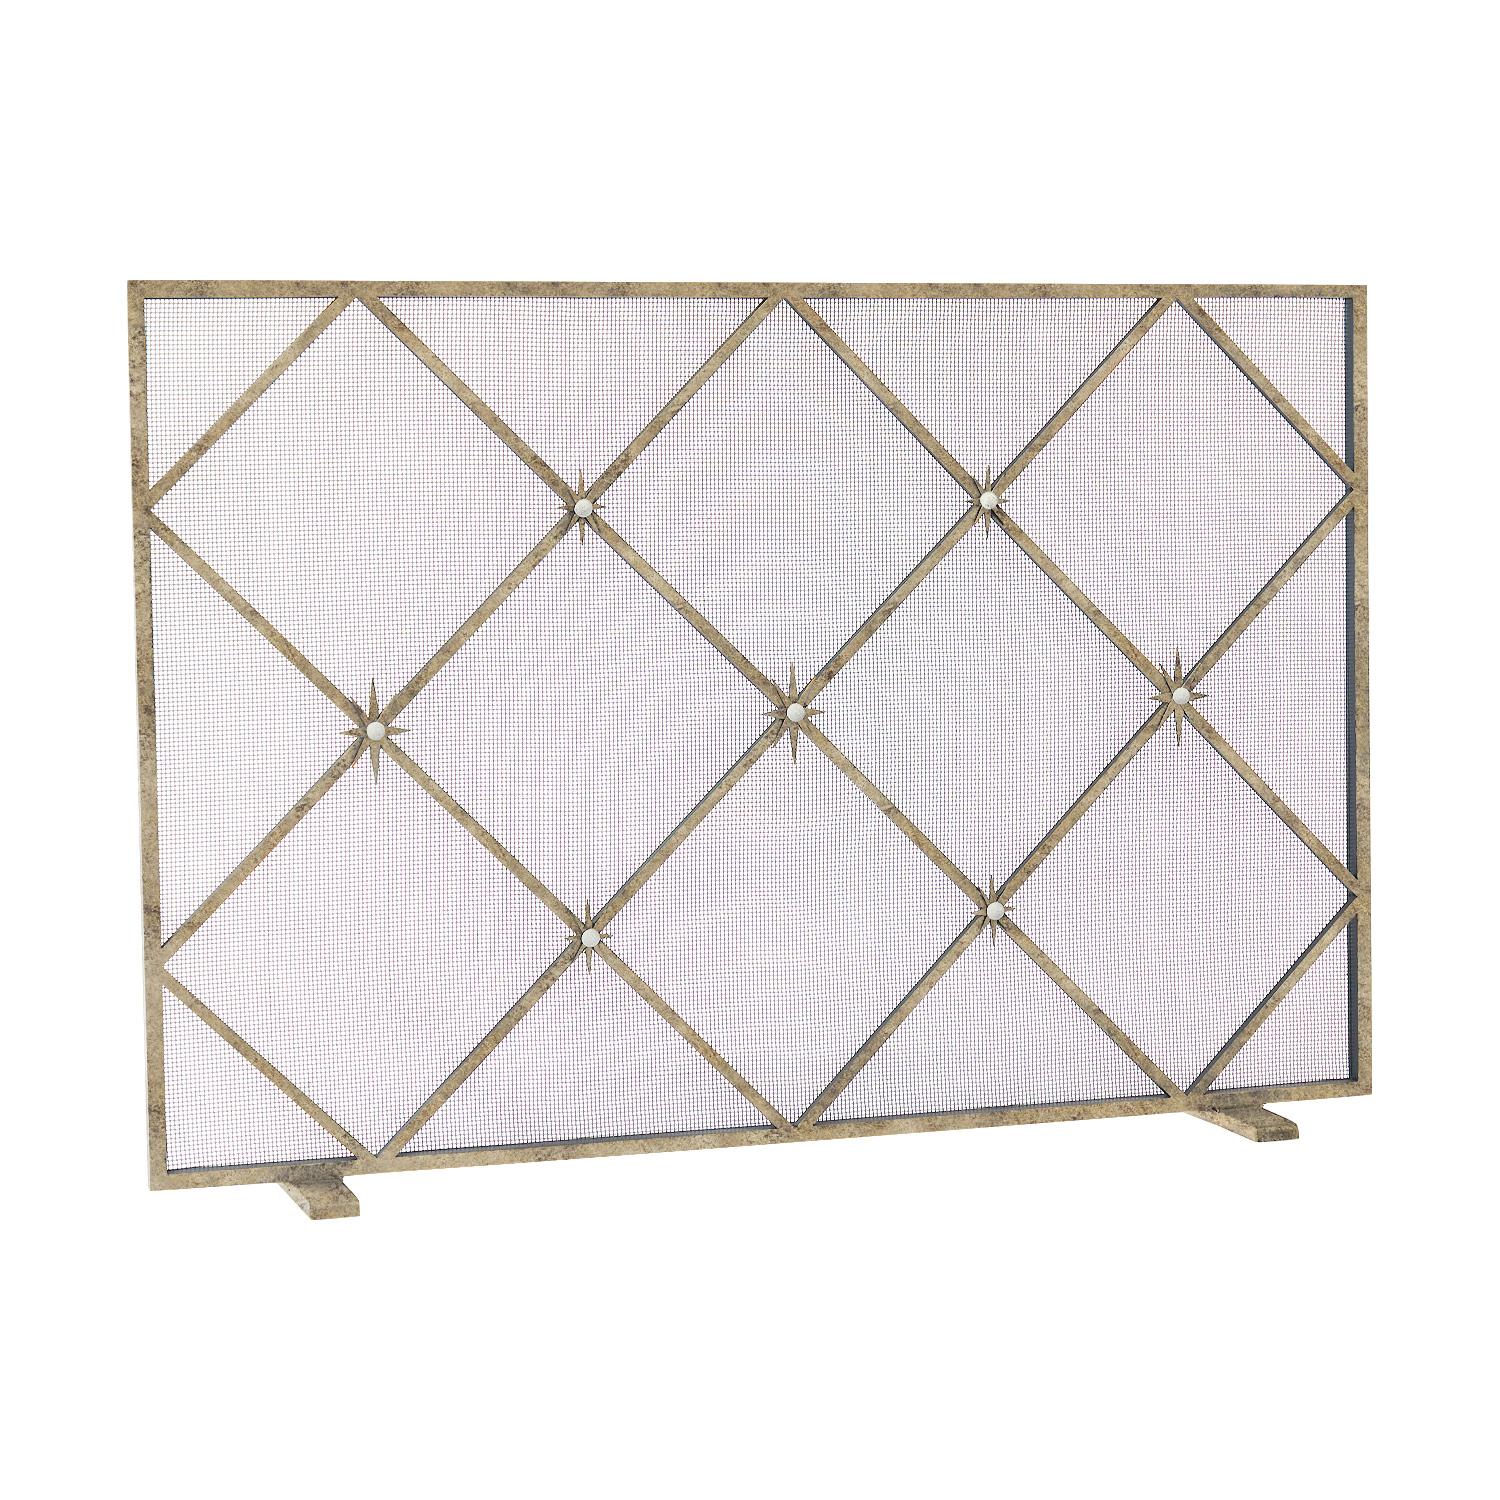 American Celeste Fireplace Screen in Aged Silver For Sale